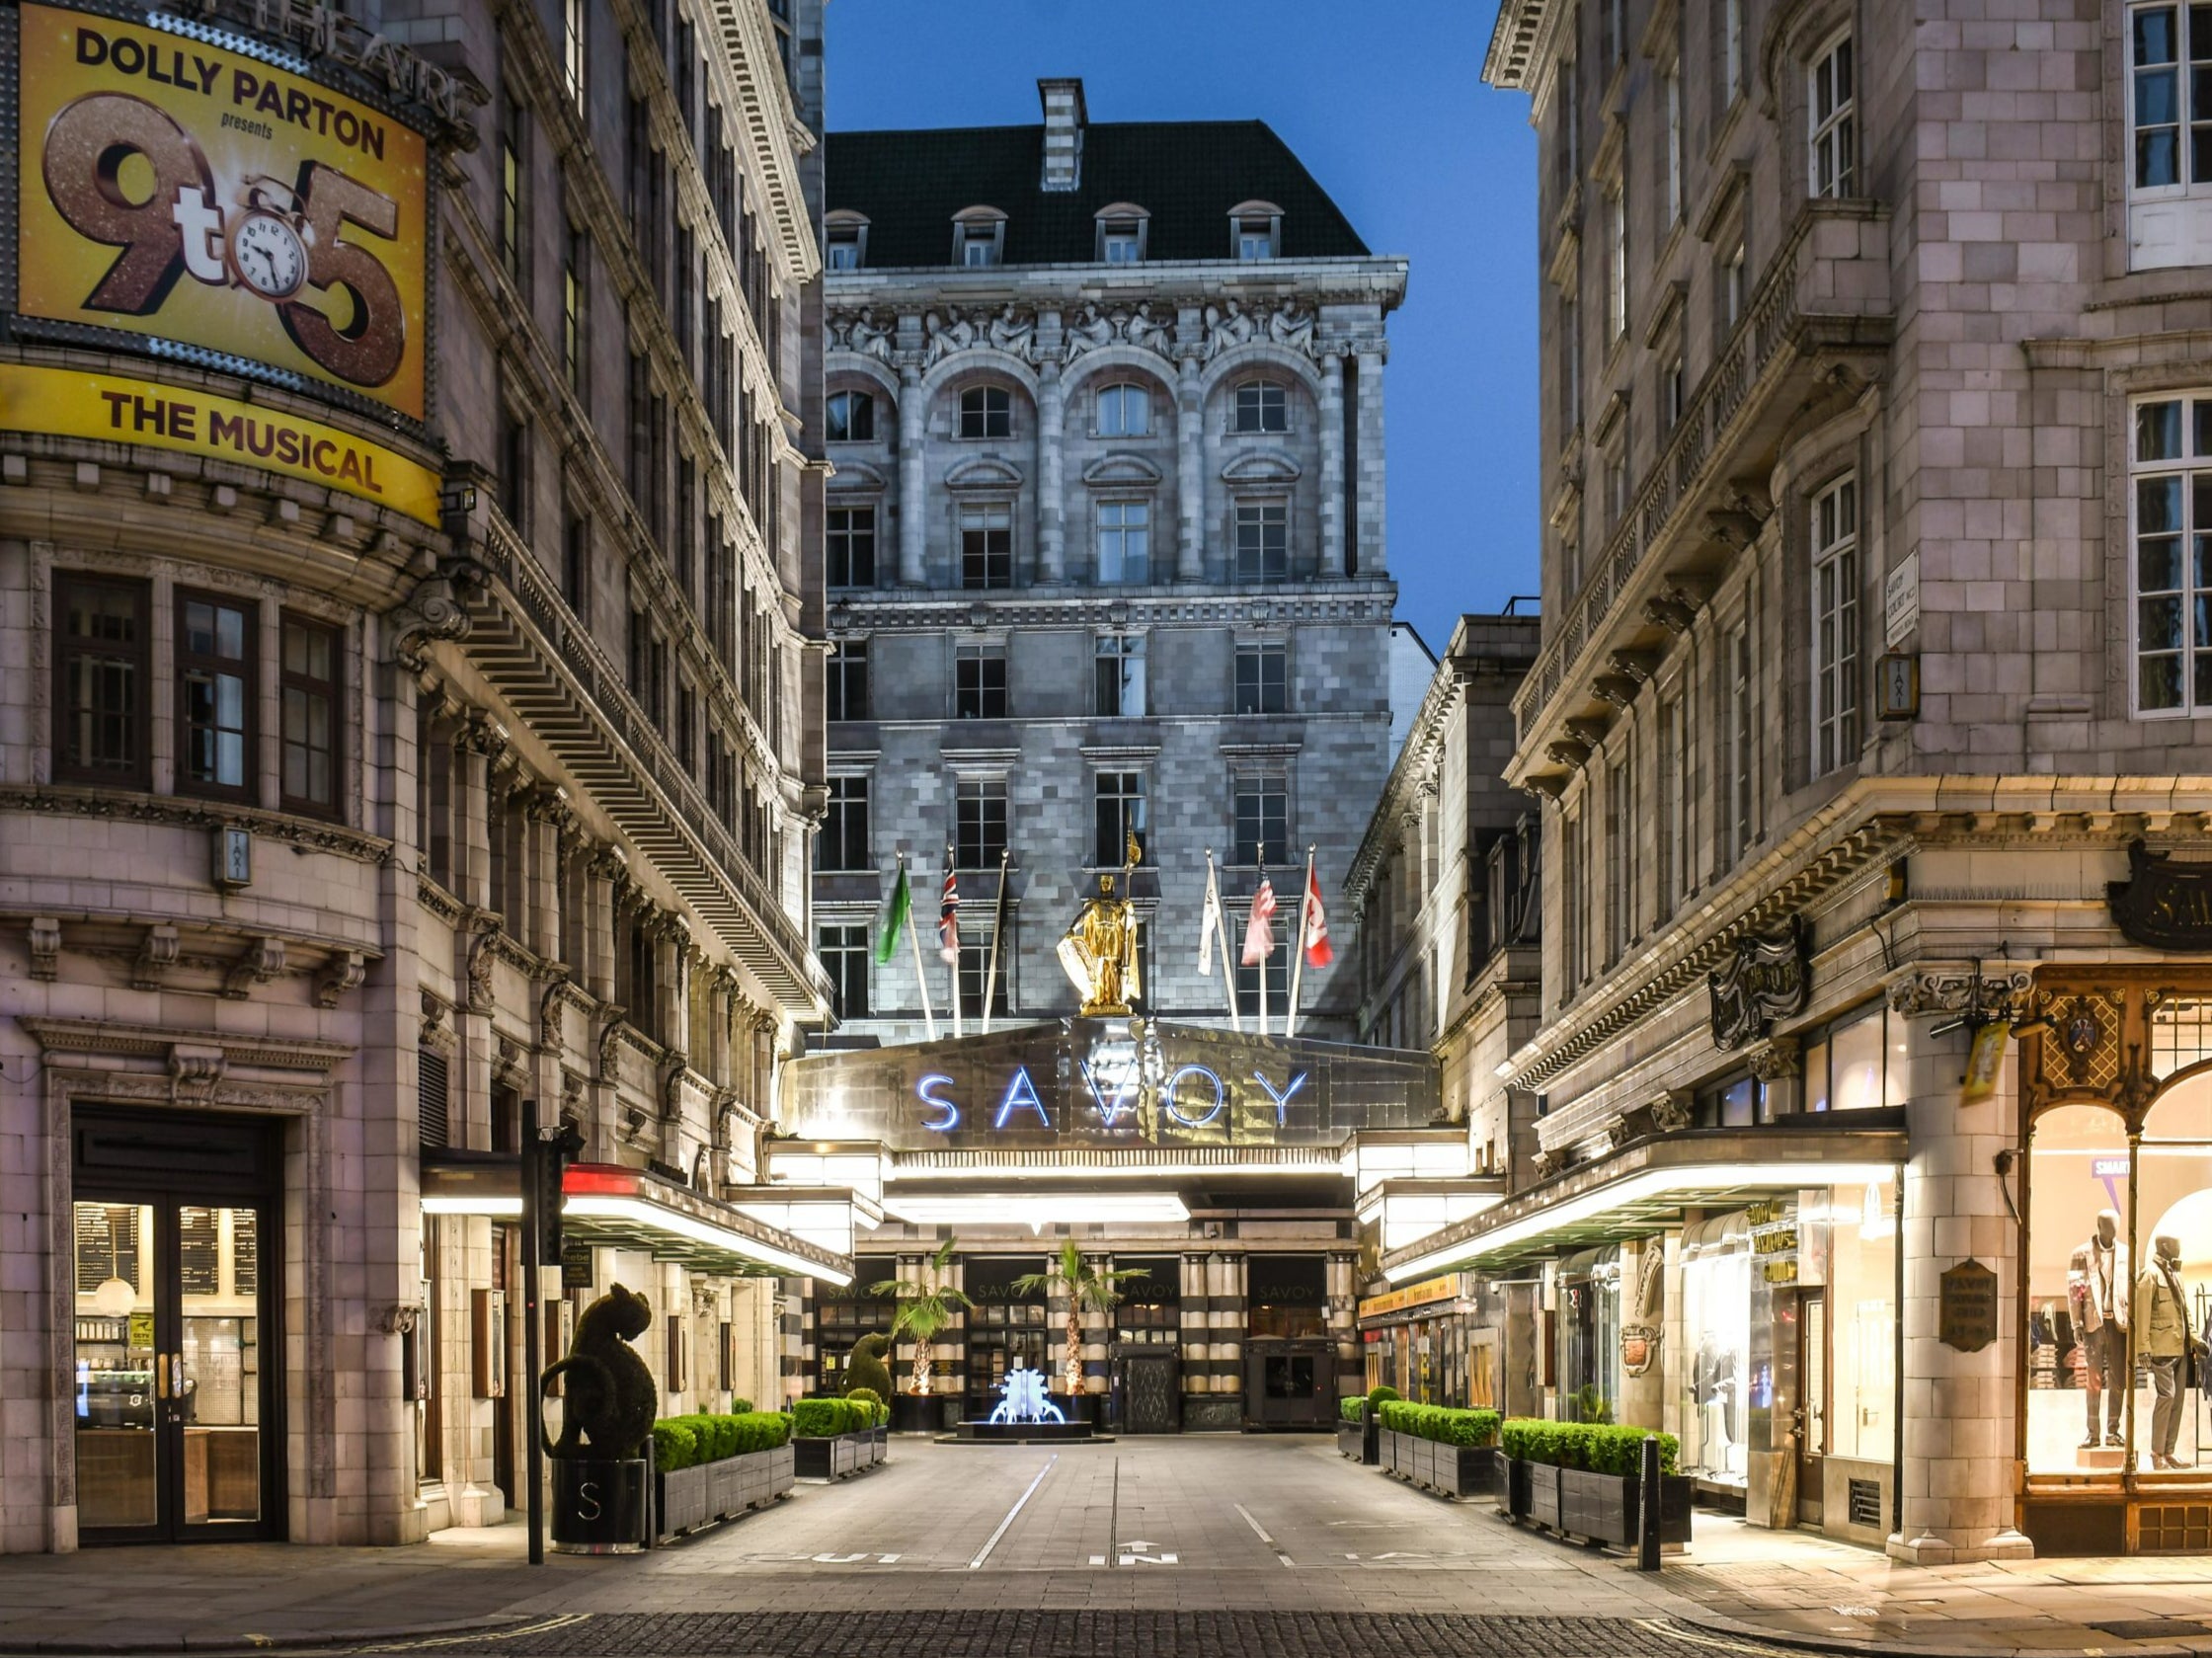 The Savoy was London’s first luxury hotel